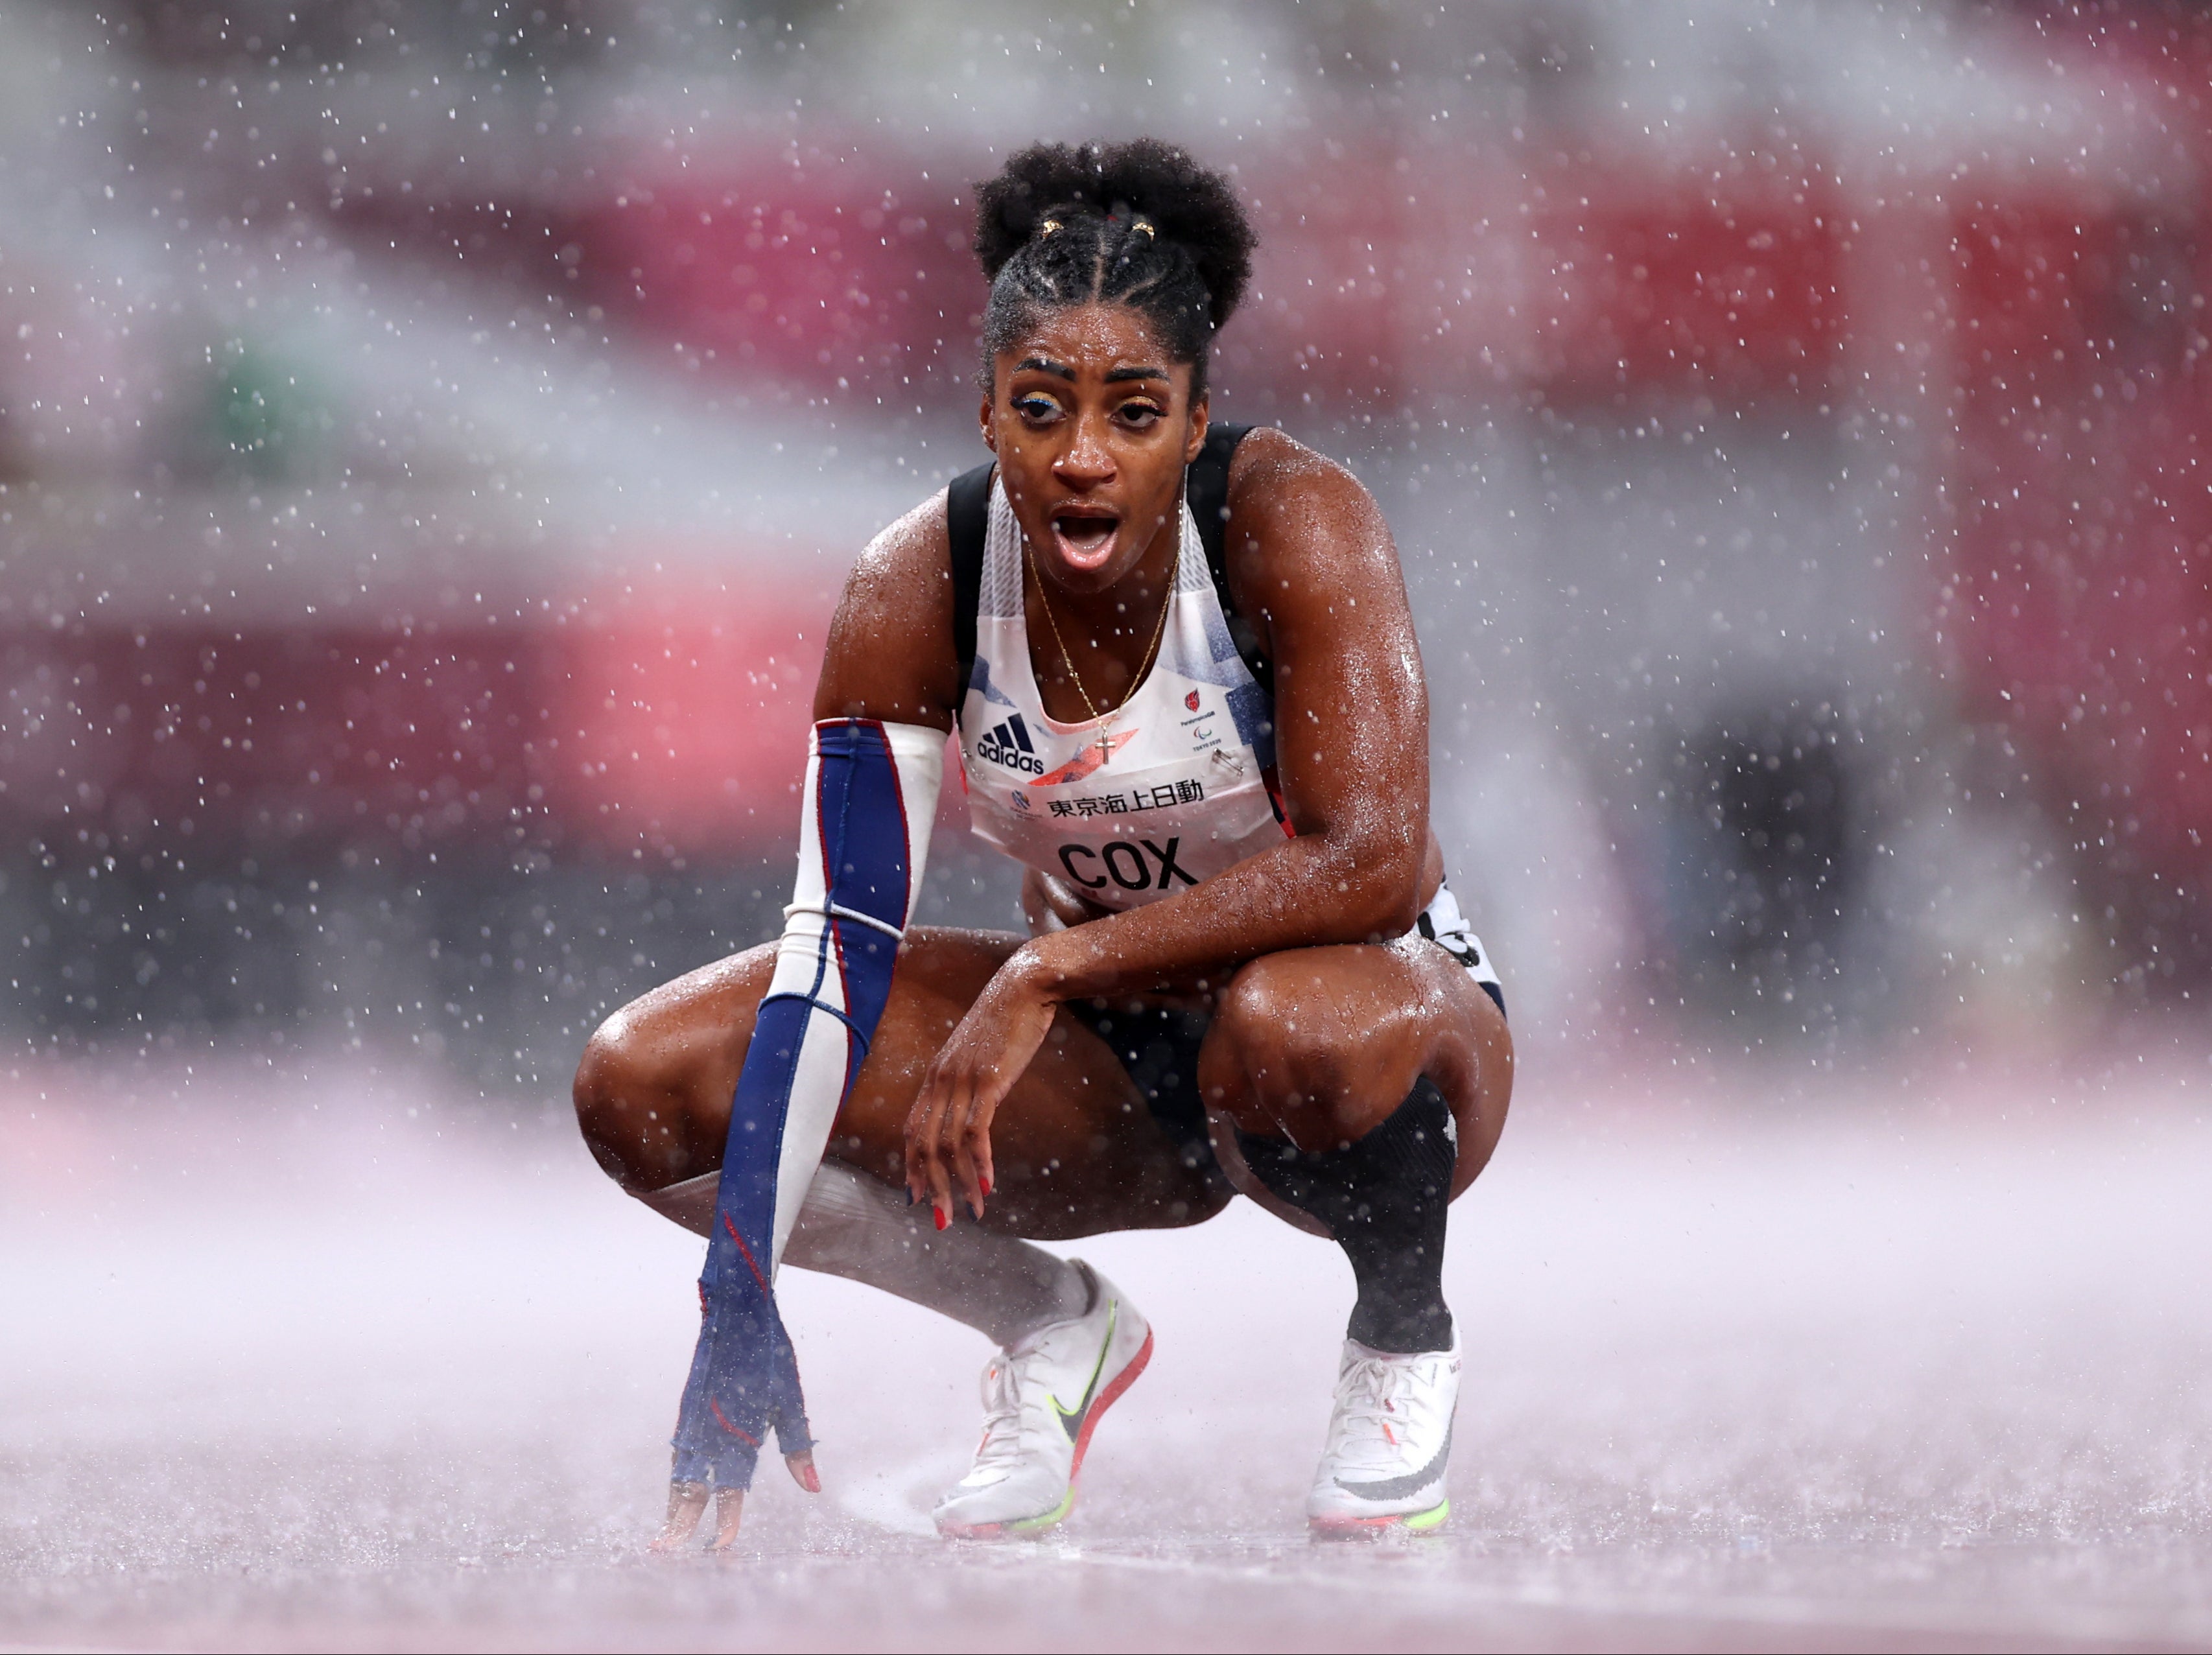 GB’s Kadeena Cox came fourth in the T38 400m final